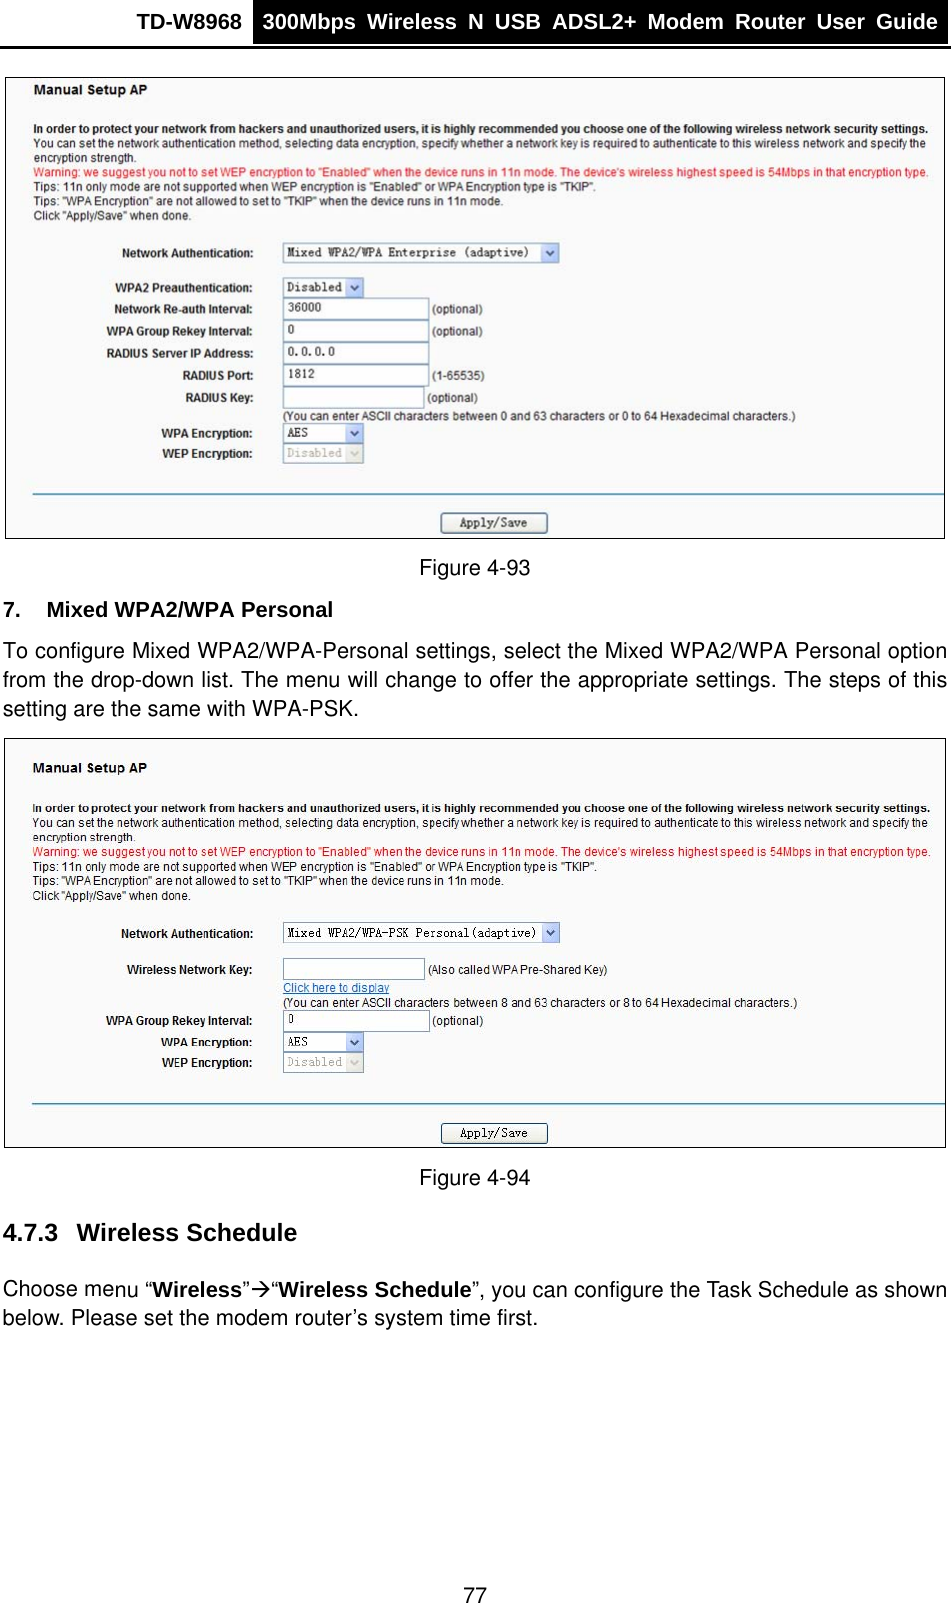 TD-W8968  300Mbps Wireless N USB ADSL2+ Modem Router User Guide   Figure 4-93 7.  Mixed WPA2/WPA Personal To configure Mixed WPA2/WPA-Personal settings, select the Mixed WPA2/WPA Personal option from the drop-down list. The menu will change to offer the appropriate settings. The steps of this setting are the same with WPA-PSK.  Figure 4-94 4.7.3  Wireless Schedule Choose menu “Wireless”Æ“Wireless Schedule”, you can configure the Task Schedule as shown below. Please set the modem router’s system time first. 77 